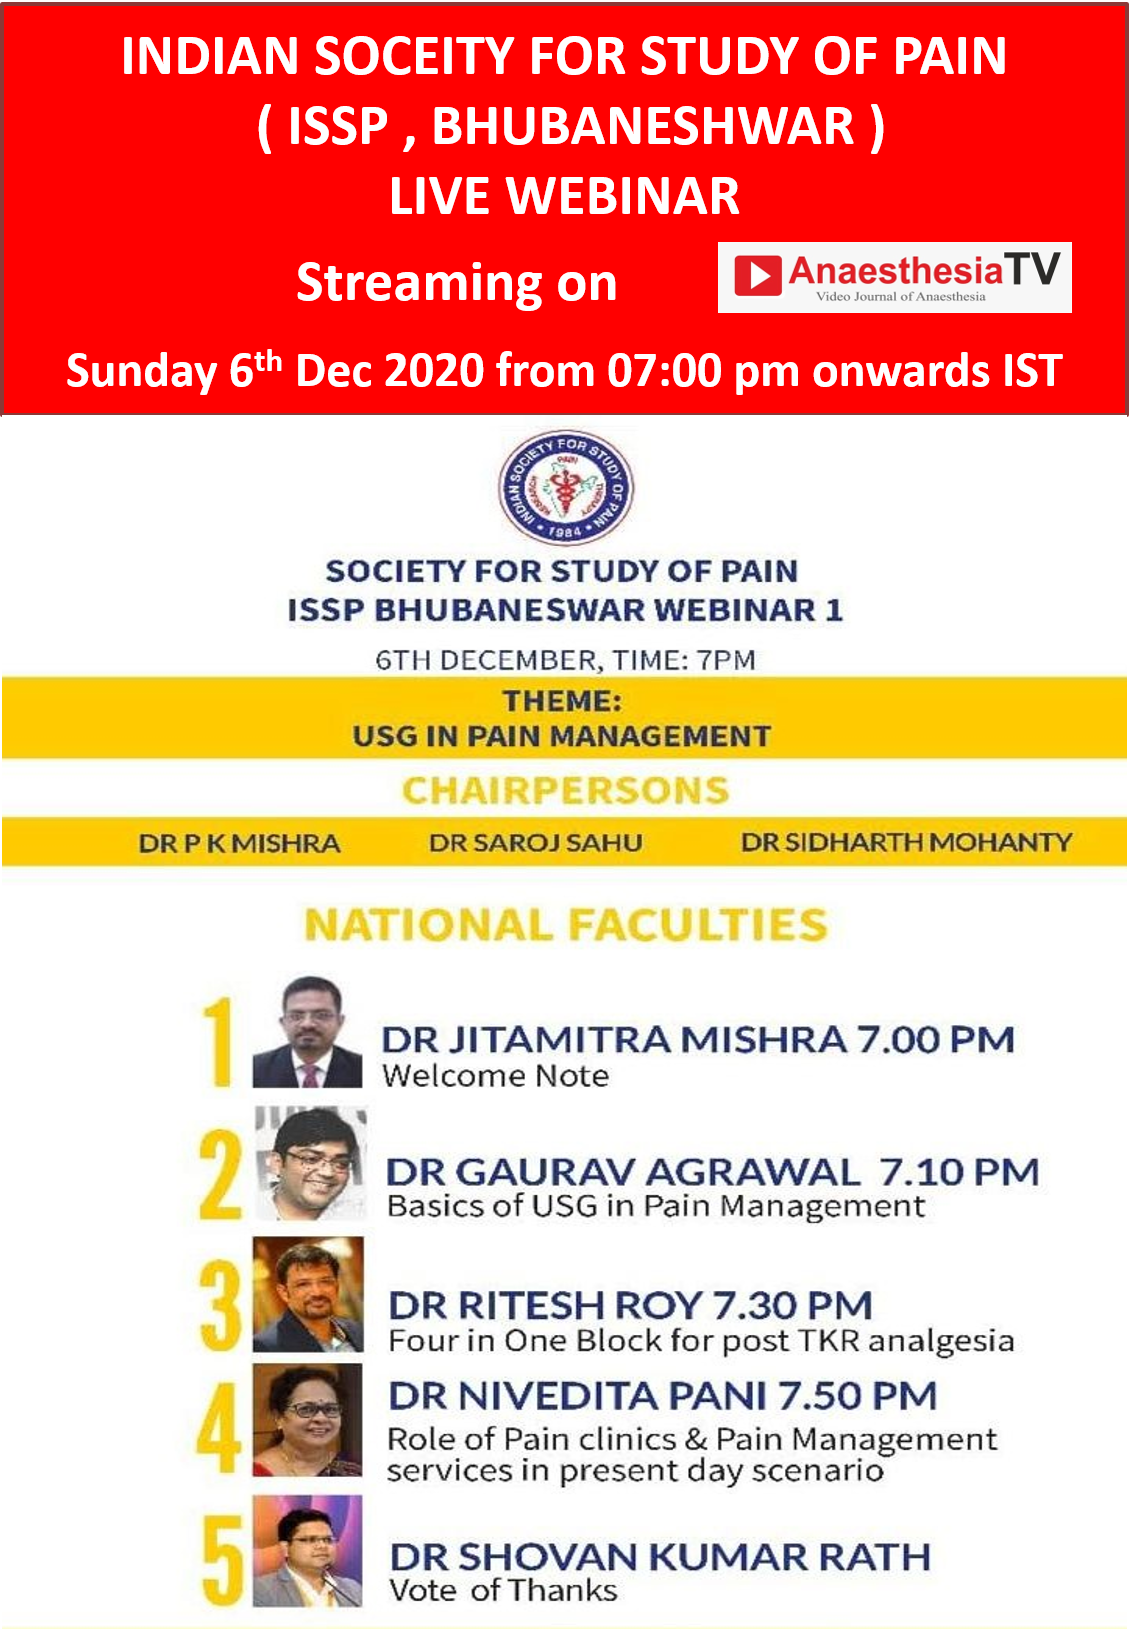 INDIAN SOCIETY FOR STUDY OF PAIN ( ISSP ) , BHUBANESWAR WEBINAR 1st on USG IN PAIN MANAGEMNET on 06th Dec 2020 at 07:00 pm IST